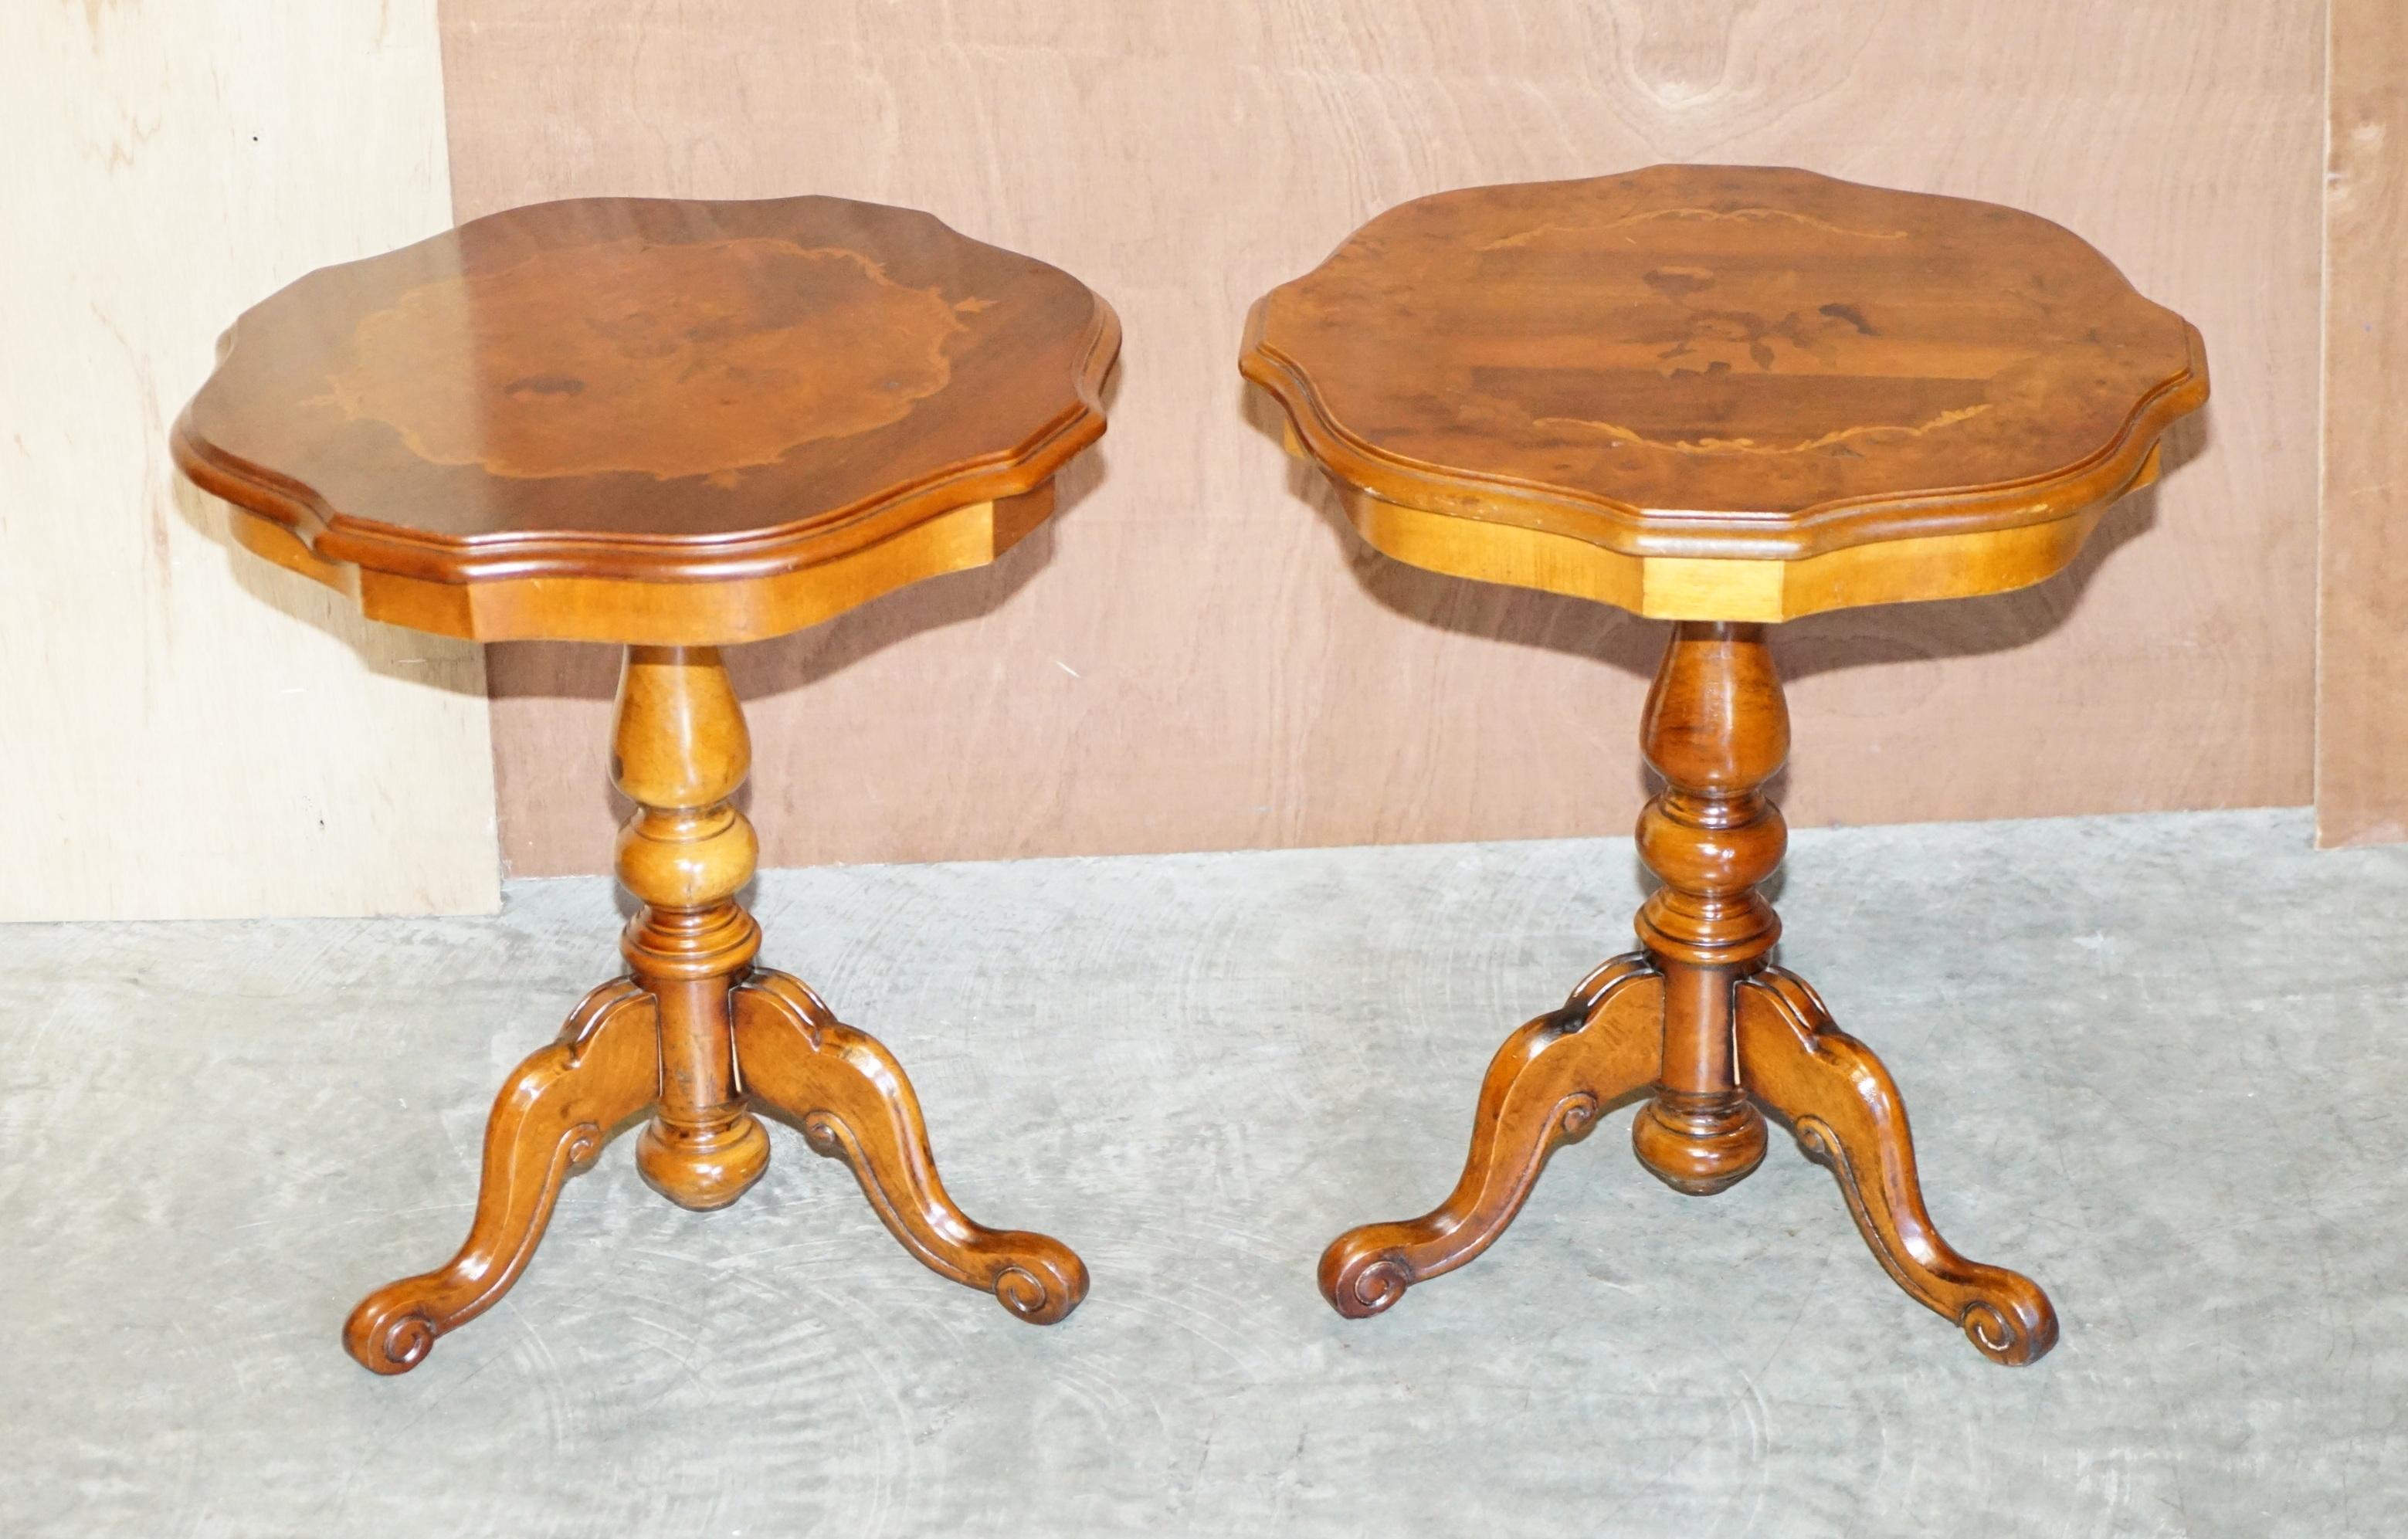 We are delighted to offer for sale this pair of vintage Italian Marquetry inlaid burr walnut and mahogany side tables 

A good looking and decorative pair, each top is inlaid with floral decorations, one table has a burr walnut boarder, the other